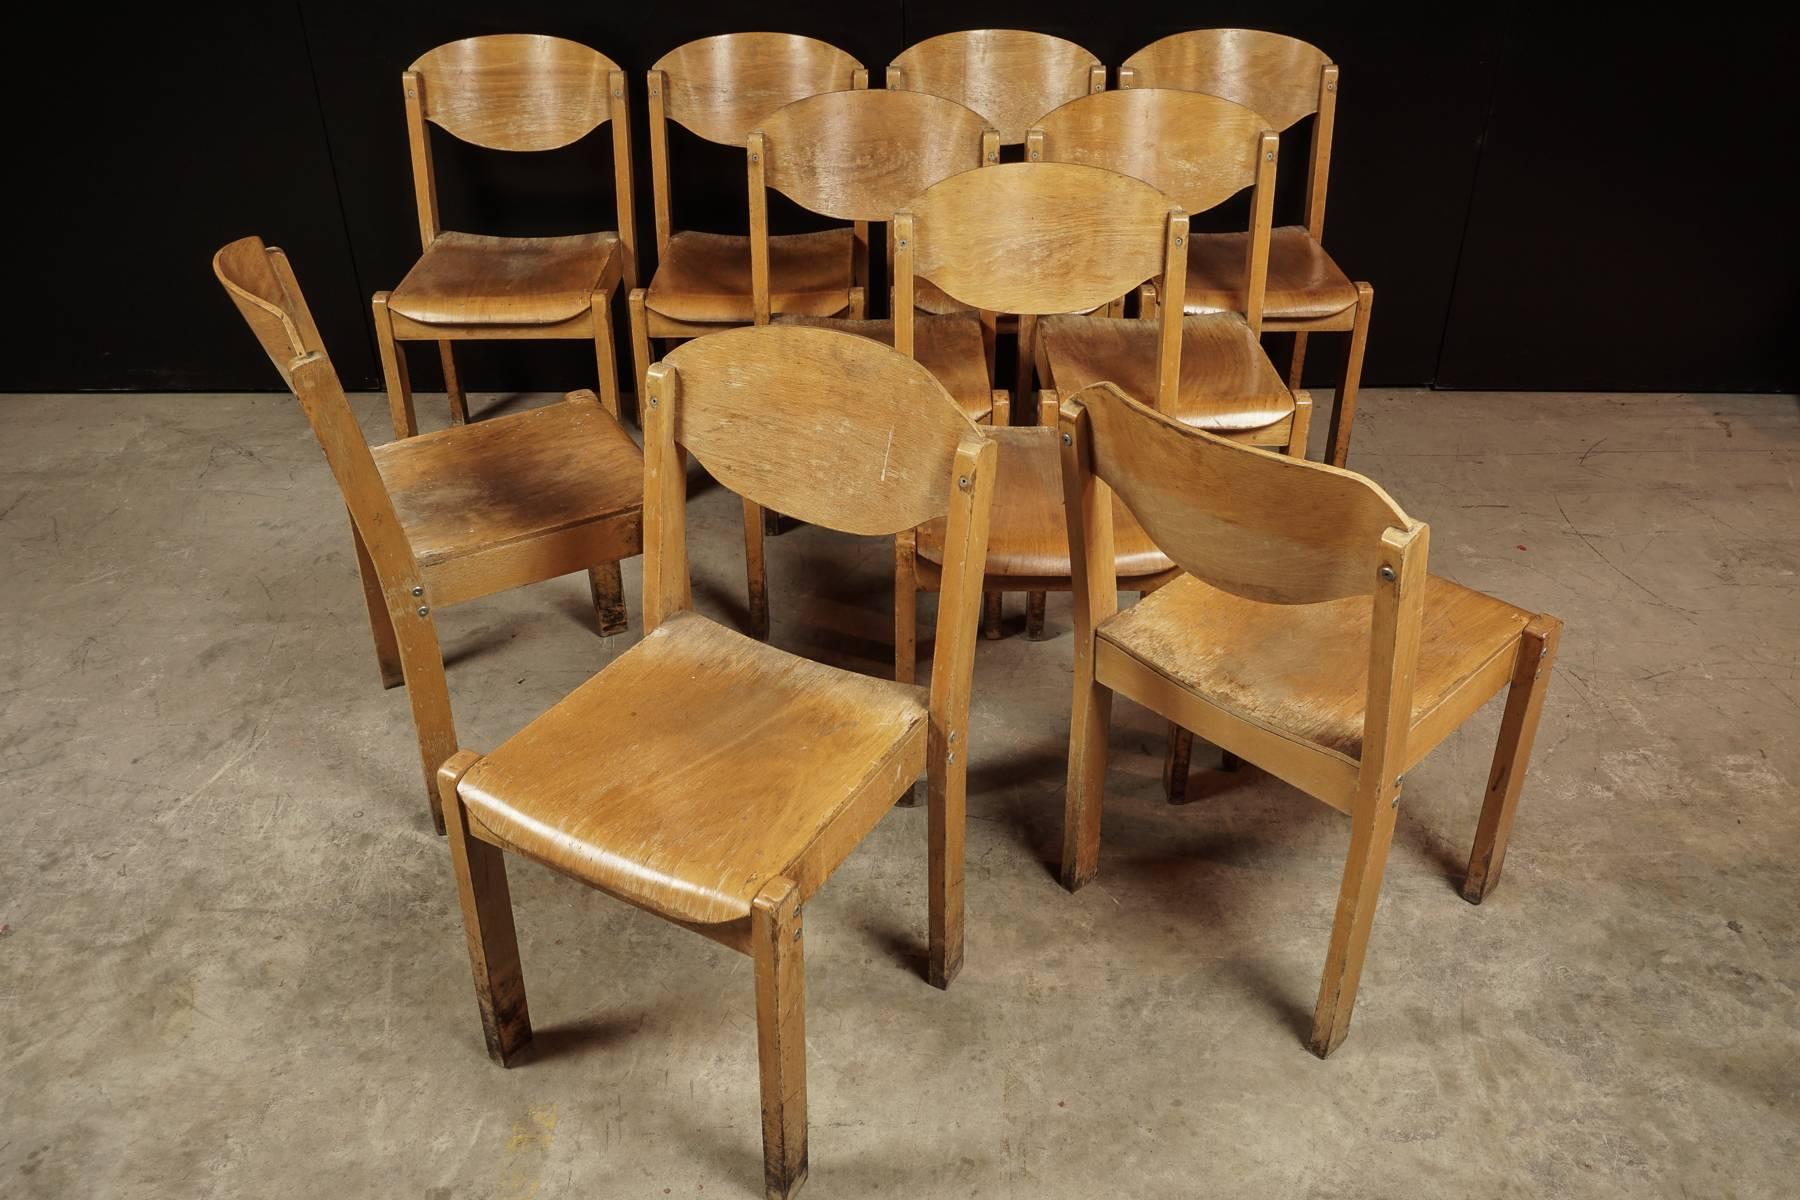 Set of ten stacking chairs from a University in France, circa 1960. Ergonomic design made of durable bent wood. 18 available.